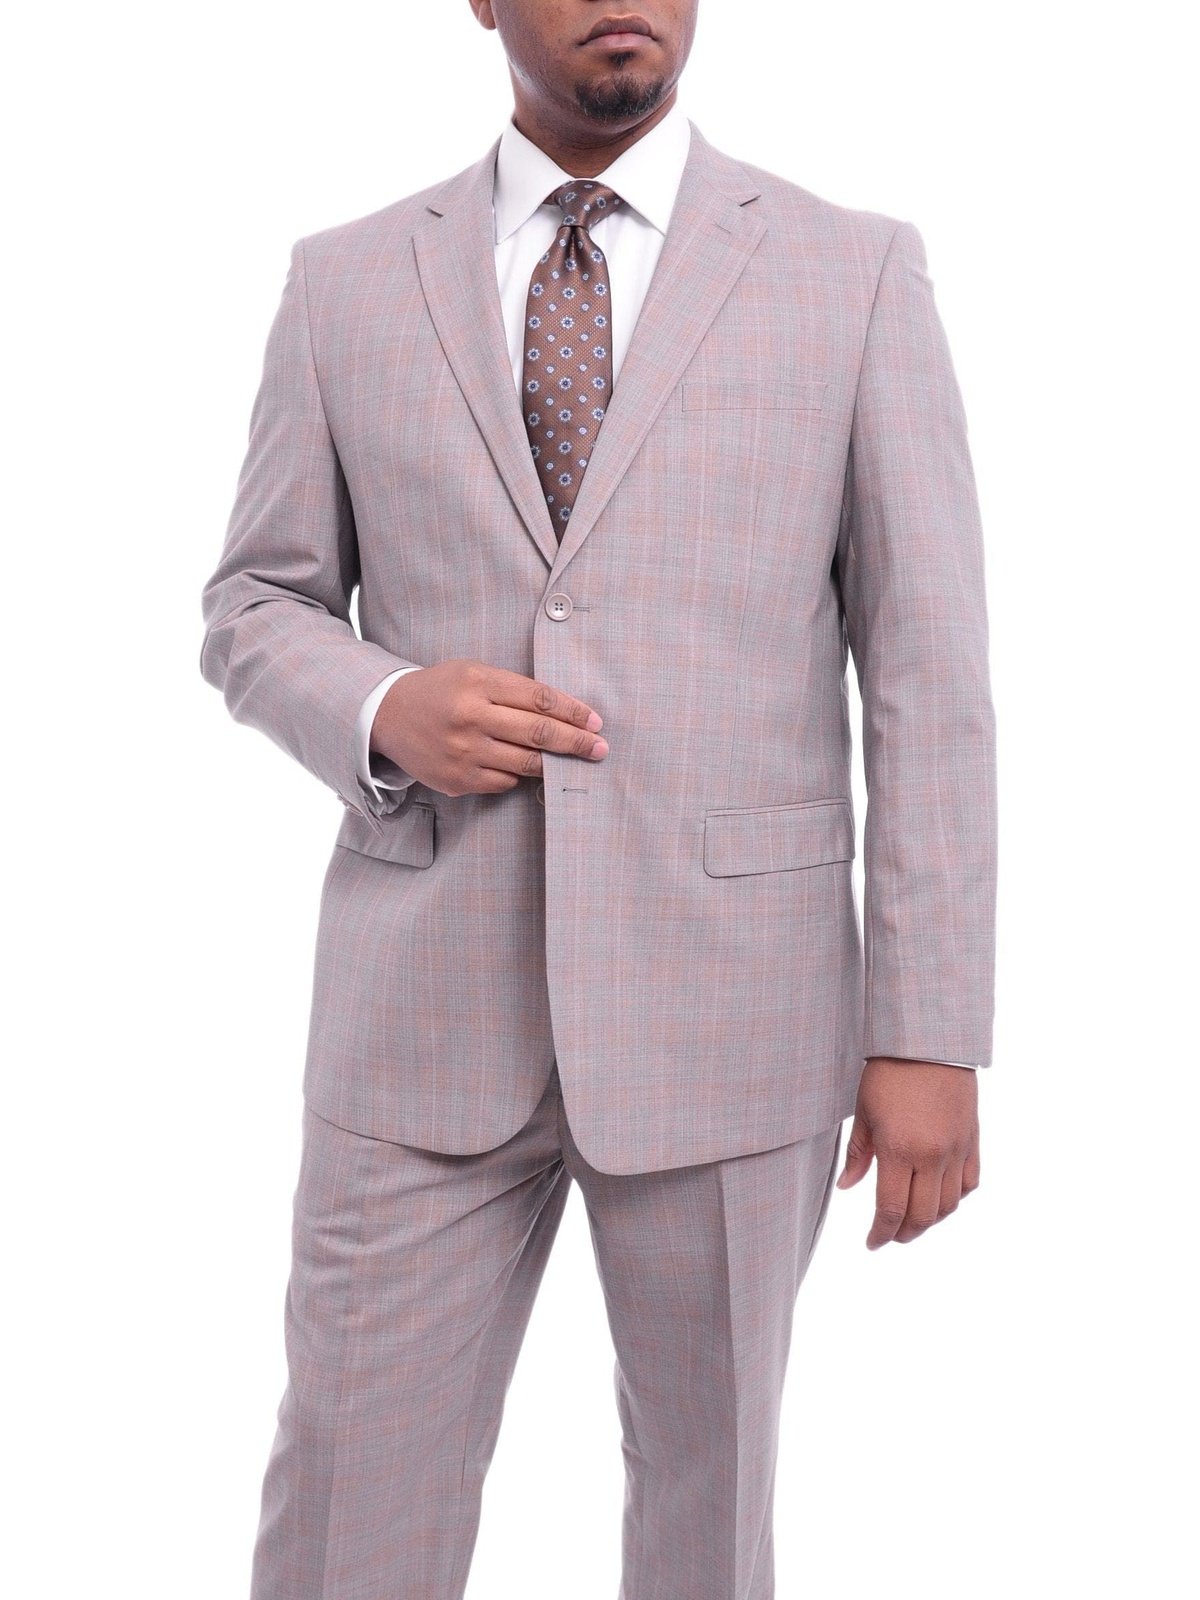 Prontomoda TWO PIECE SUITS Prontomoda Classic Fit Tan With Blue And White Windowpane Two Buttton Wool Suit